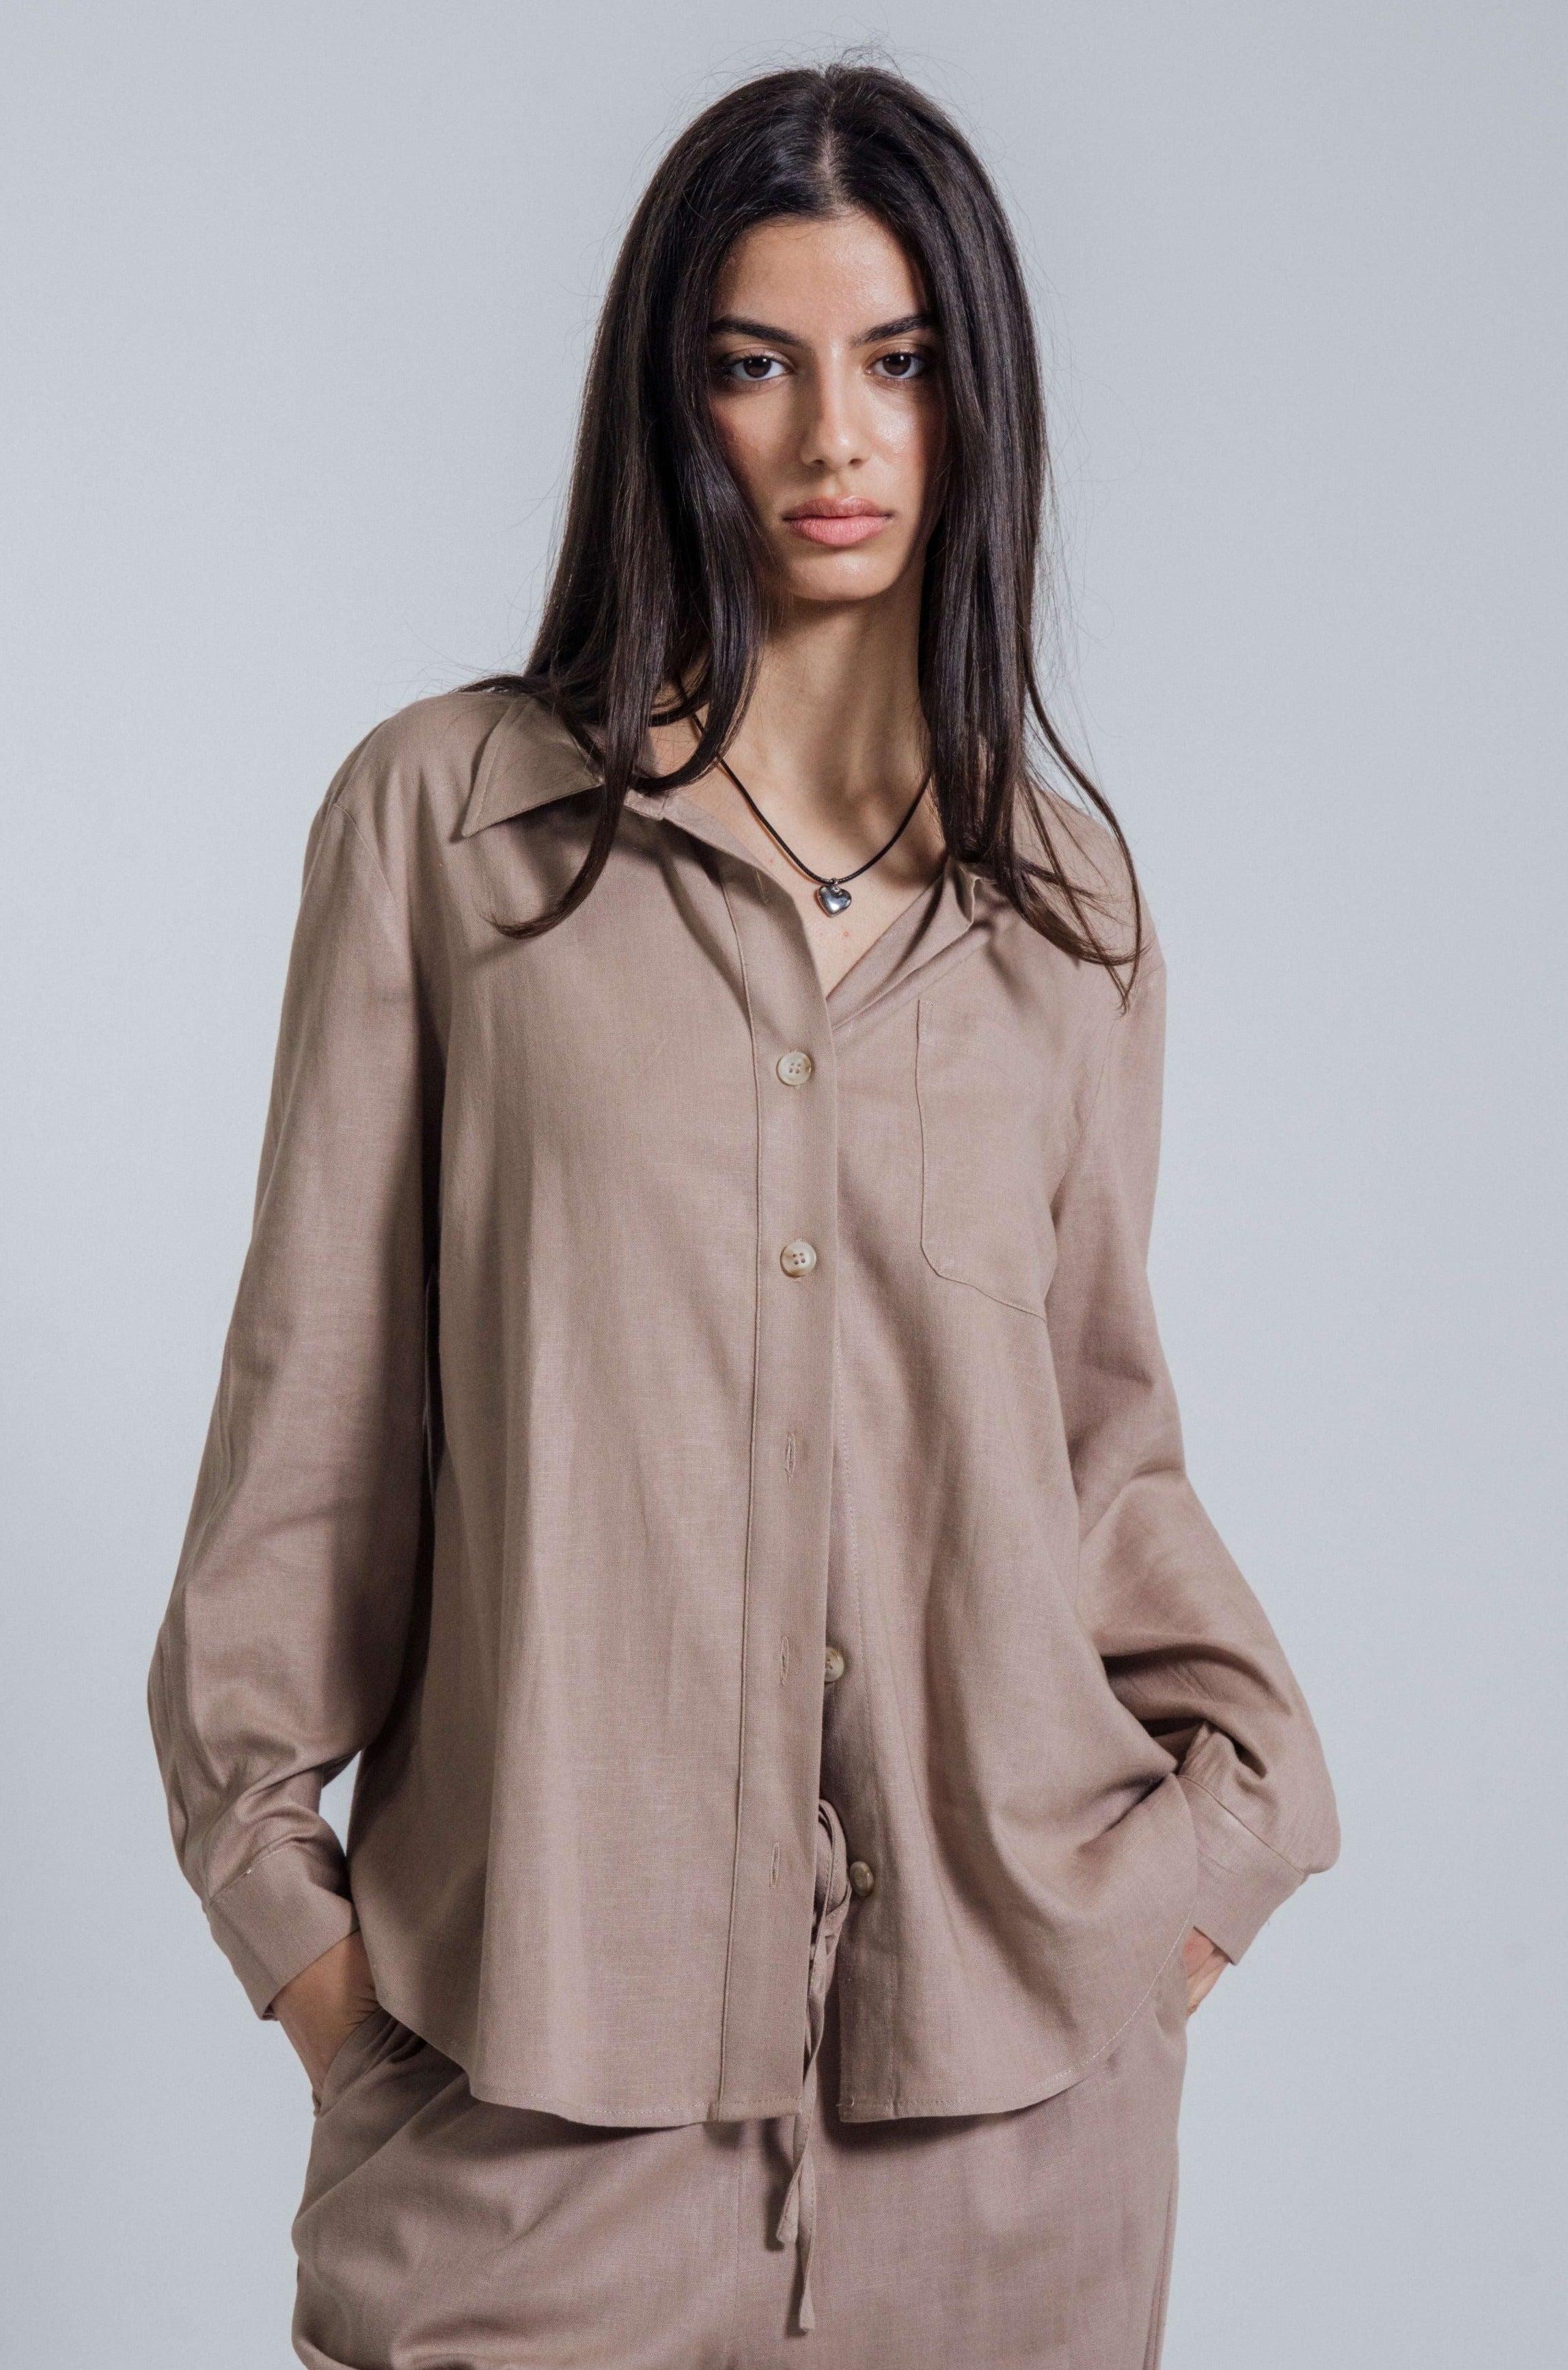 Wildflo StudioThe Linen Shirt in Taupe at Style Society hanging shirt